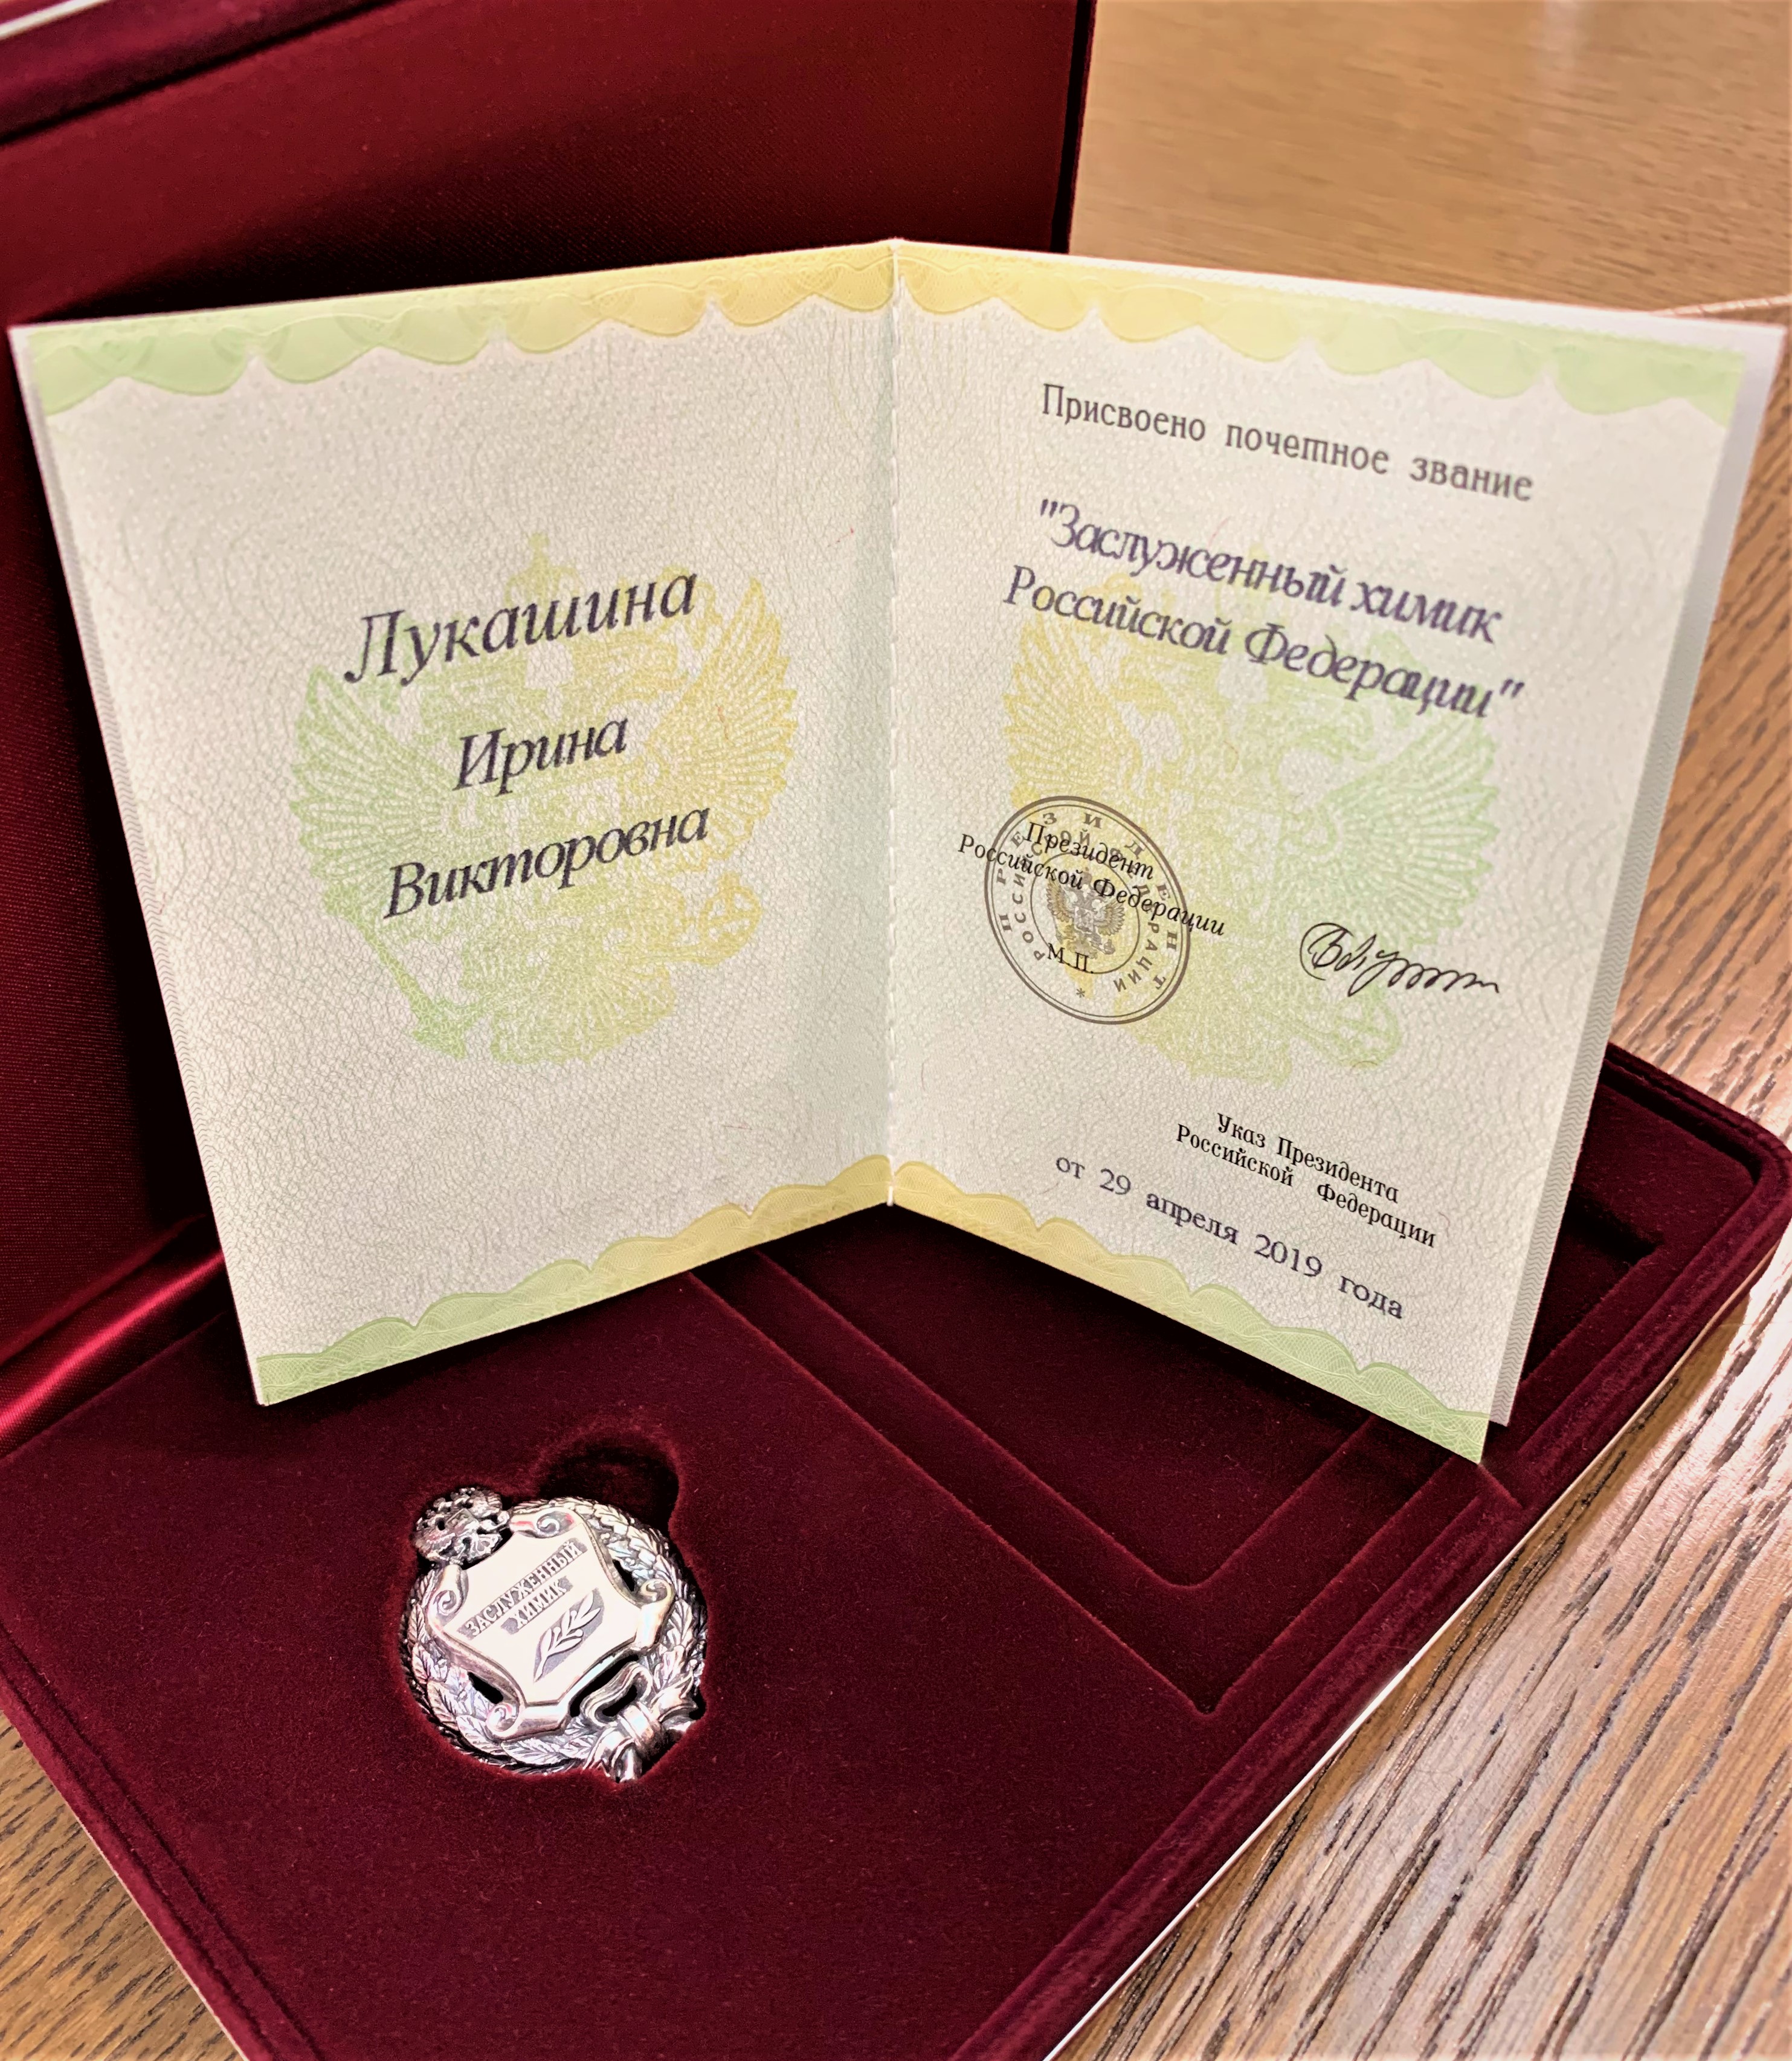 On October 21, national award distribution official ceremony took place at the Ministry of Industry and Trade of the Russian Federation